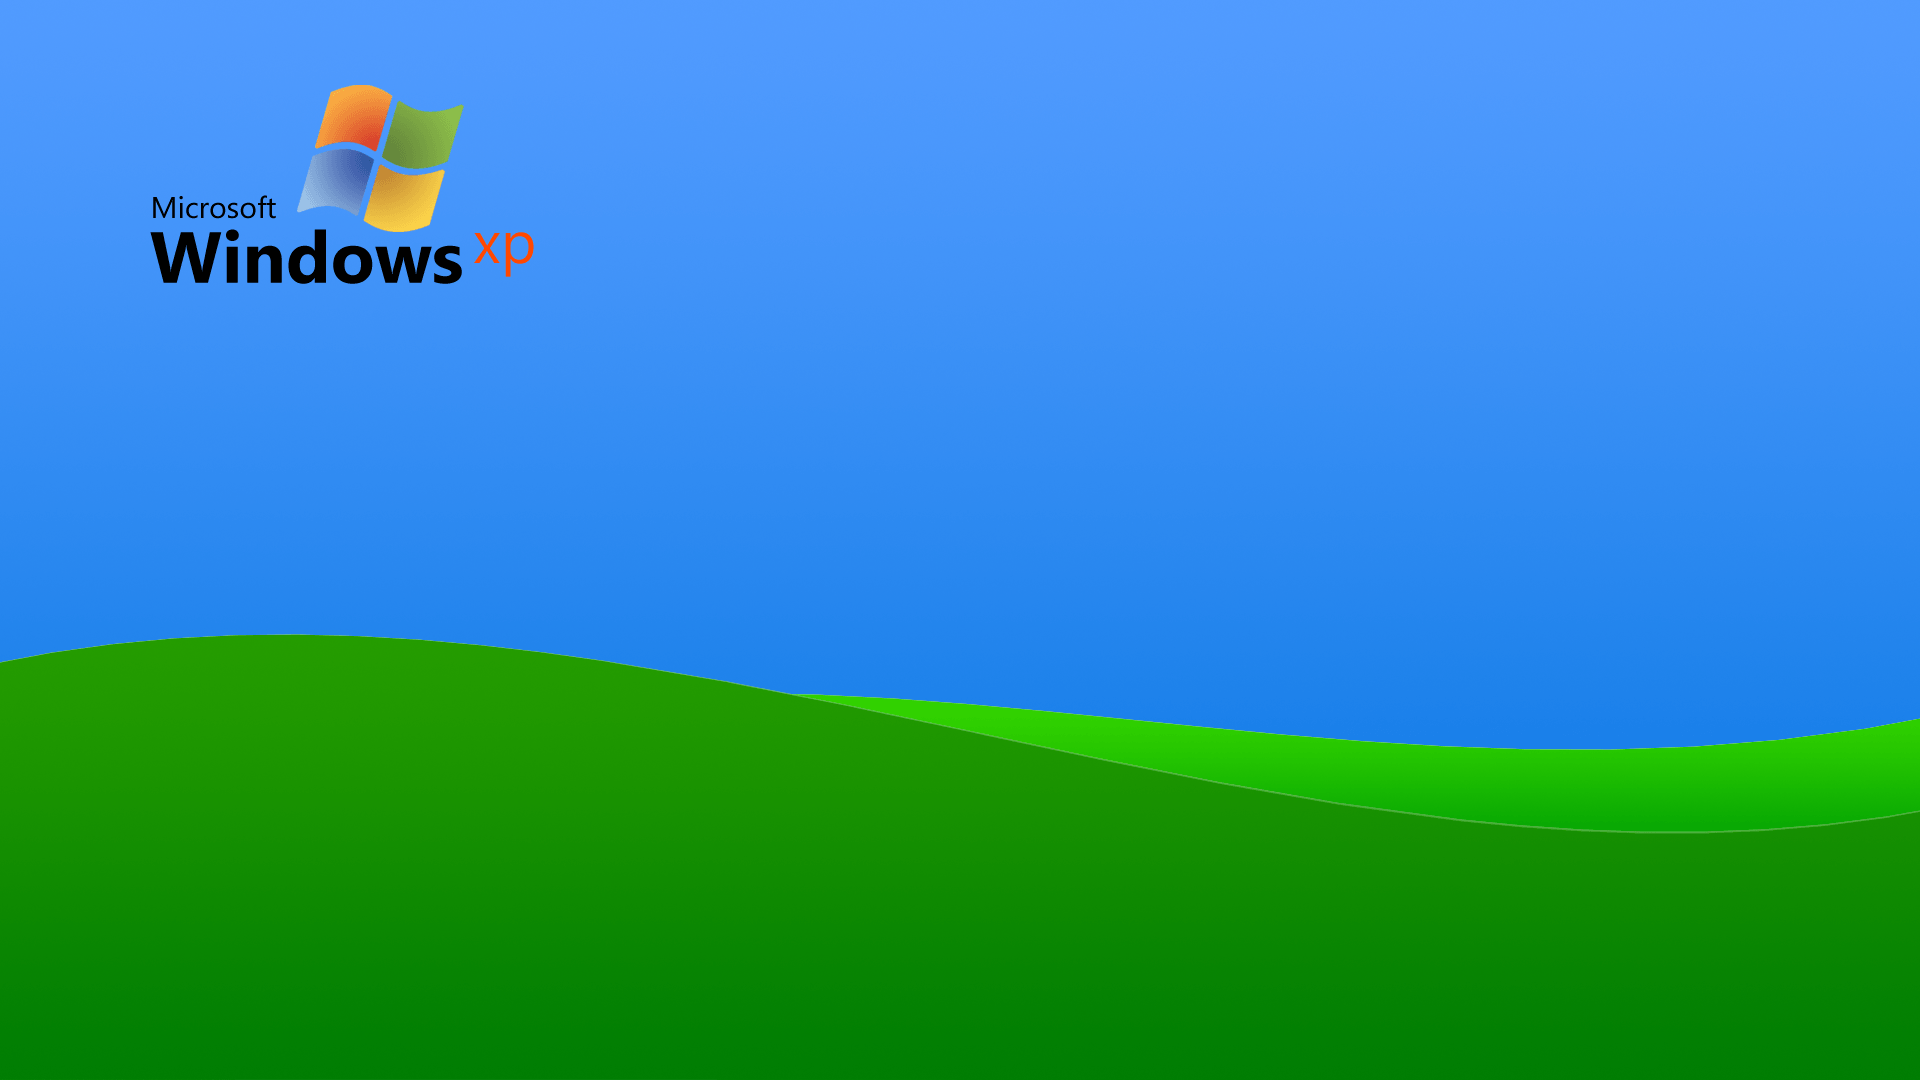 Cool Windows XP Wallpaper In HD For Free Download